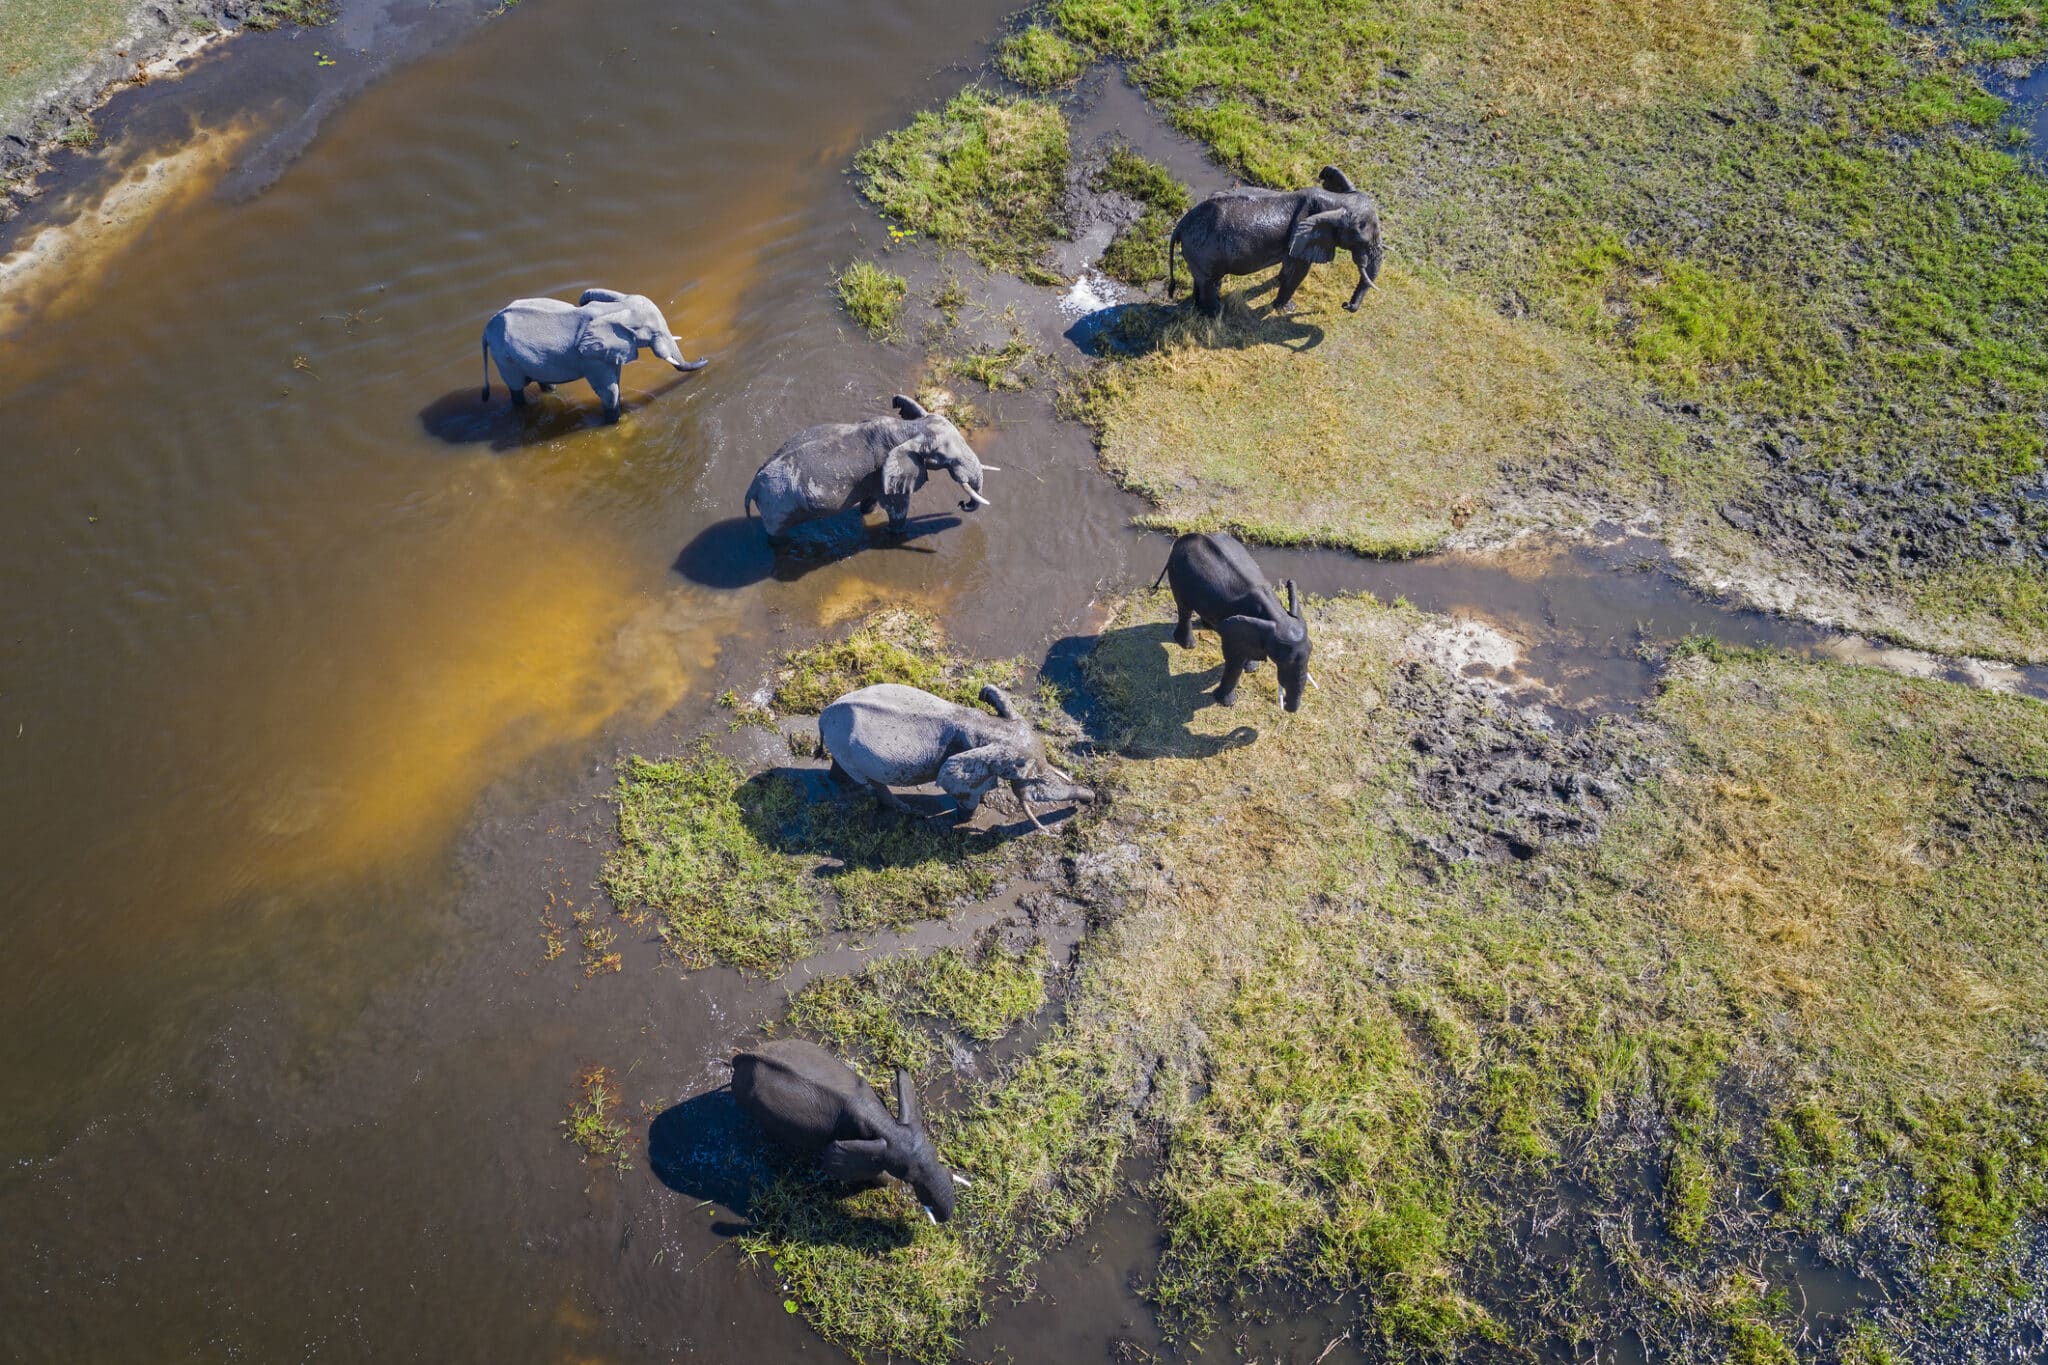 Aerial view of a group of African elephants (Loxodonta africana) in Khwai river, Moremi National Park in Okavango Delta, Botswana, Africa.